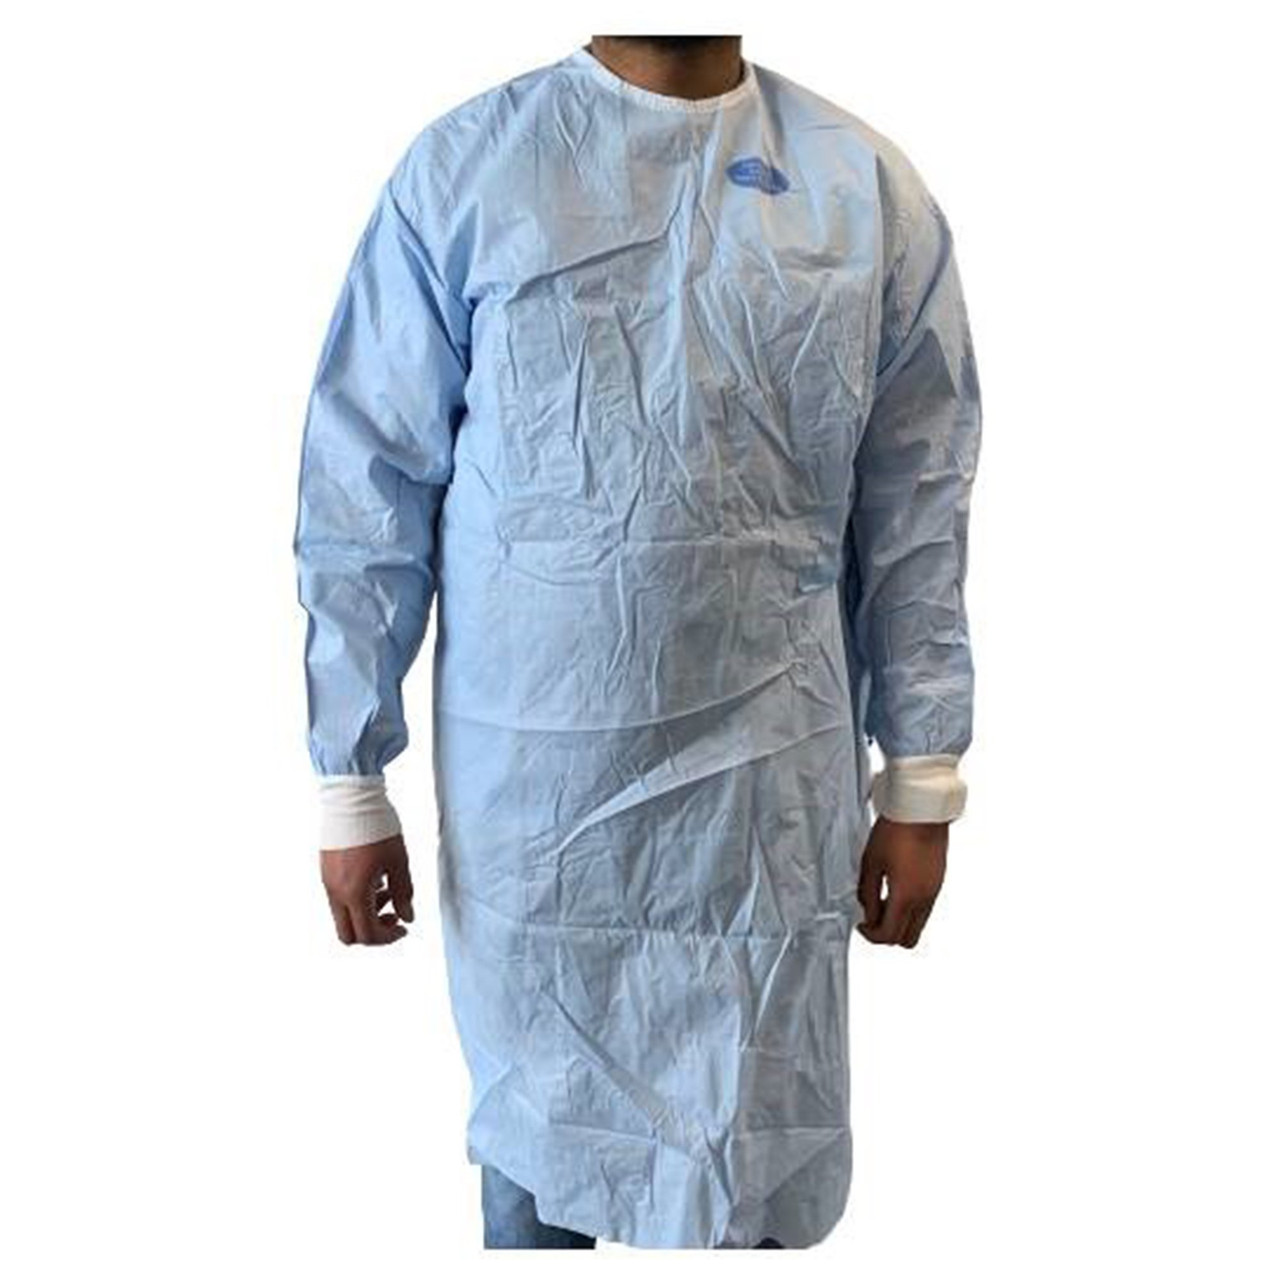 Intco AAMI Level 3 Disposable Non-Surgical Isolation Gown, India | Ubuy